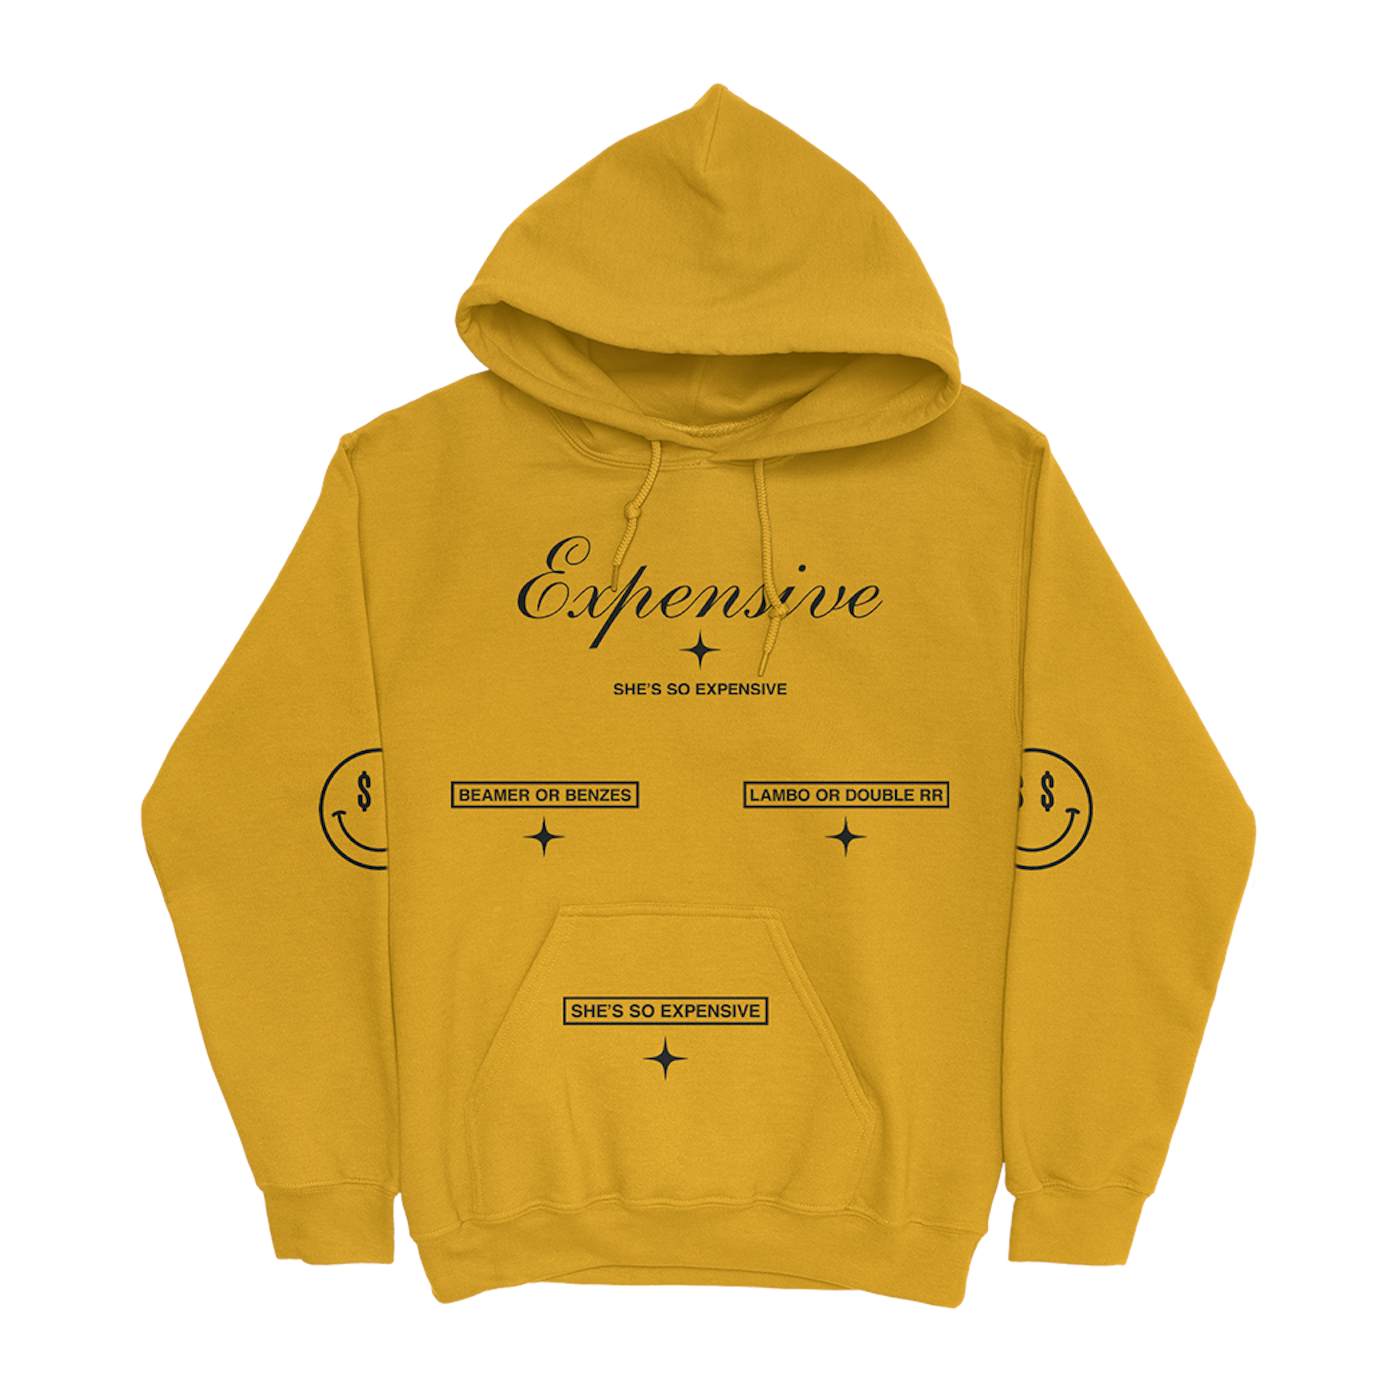 Ty Dolla $ign Expensive Yellow Hoodie